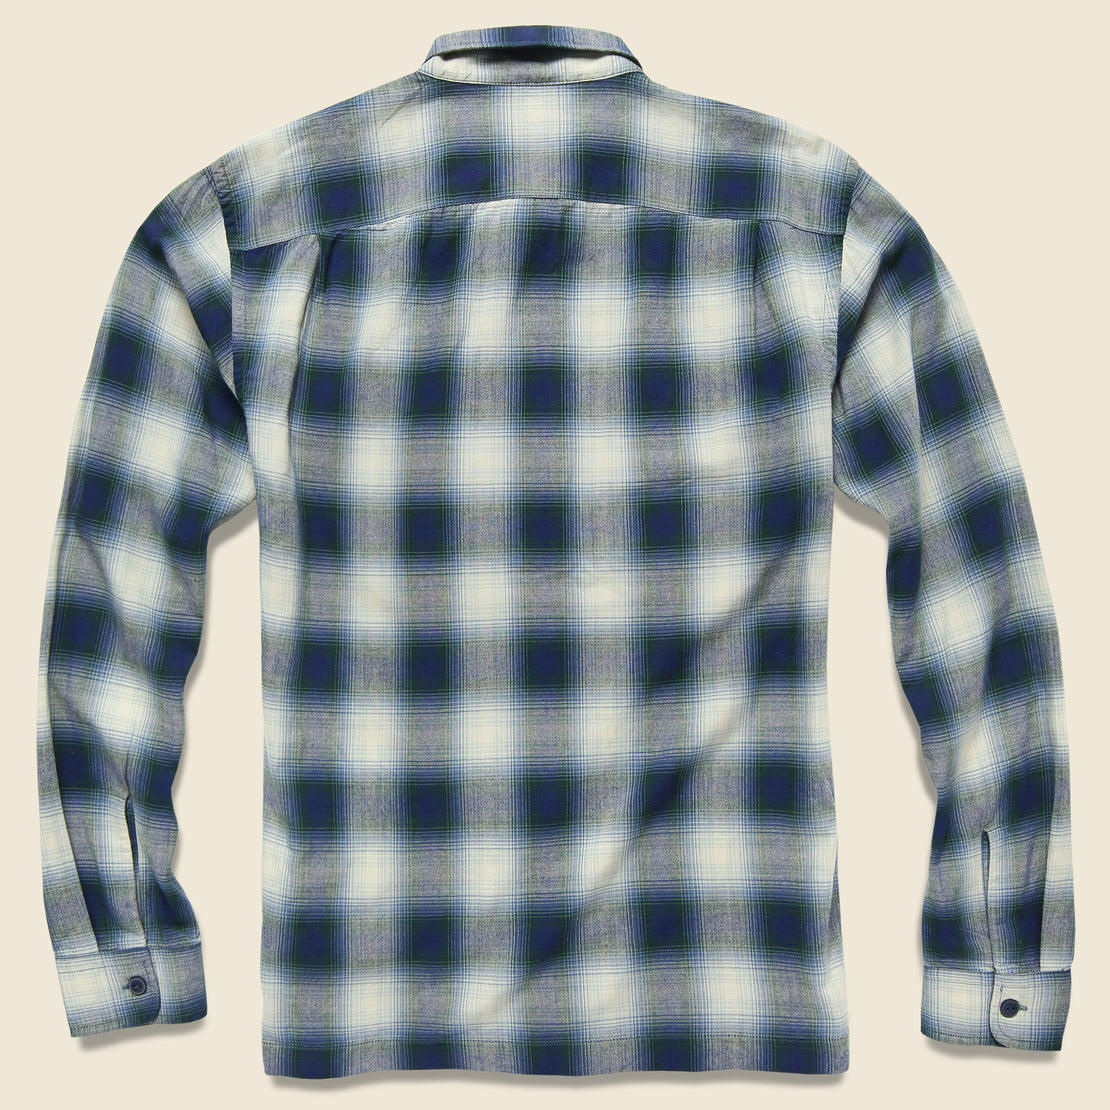 Monterey Workshirt - Blue/Green - RRL - STAG Provisions - Tops - L/S Woven - Plaid